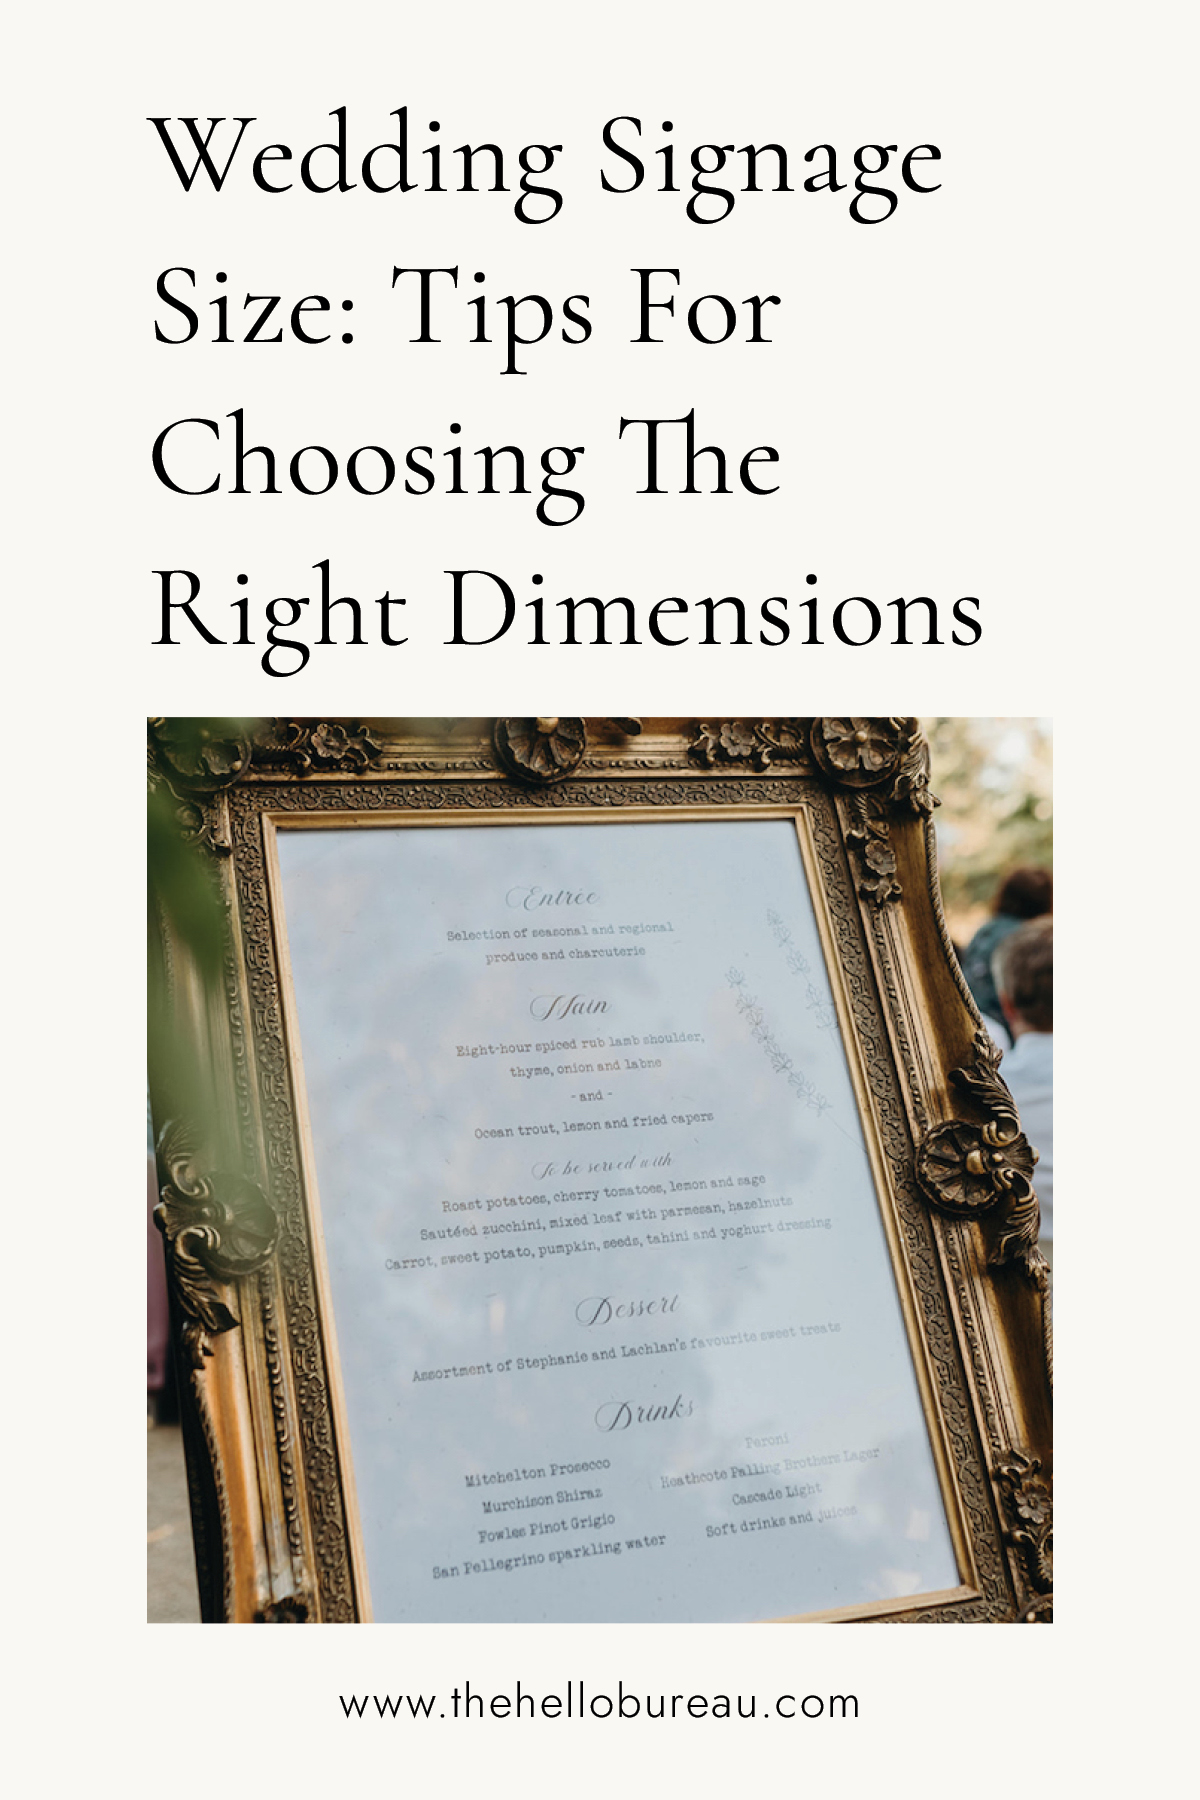 Why Wedding Signage Size Matters: Tips For Choosing The Right Dimensions